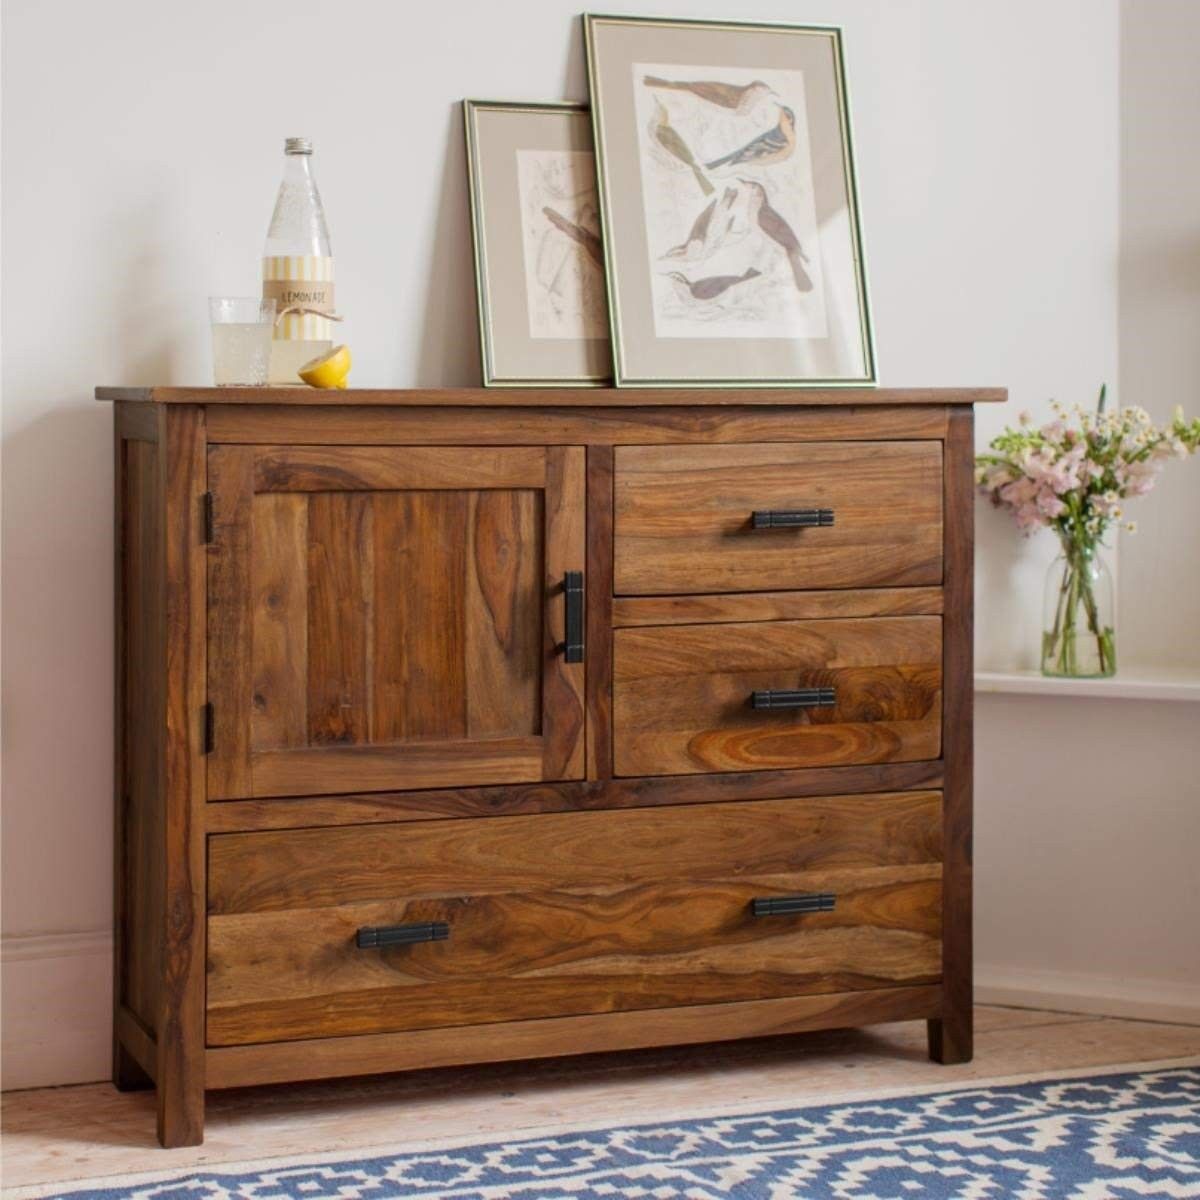 Jett Sheesham Wood Sideboard Cabinet For Living Room Furniture 3 Drawers 1 Cabinet  Storage Natural Honey Finish – Shagun Arts Regarding Wood Cabinet With Drawers (Photo 8 of 15)